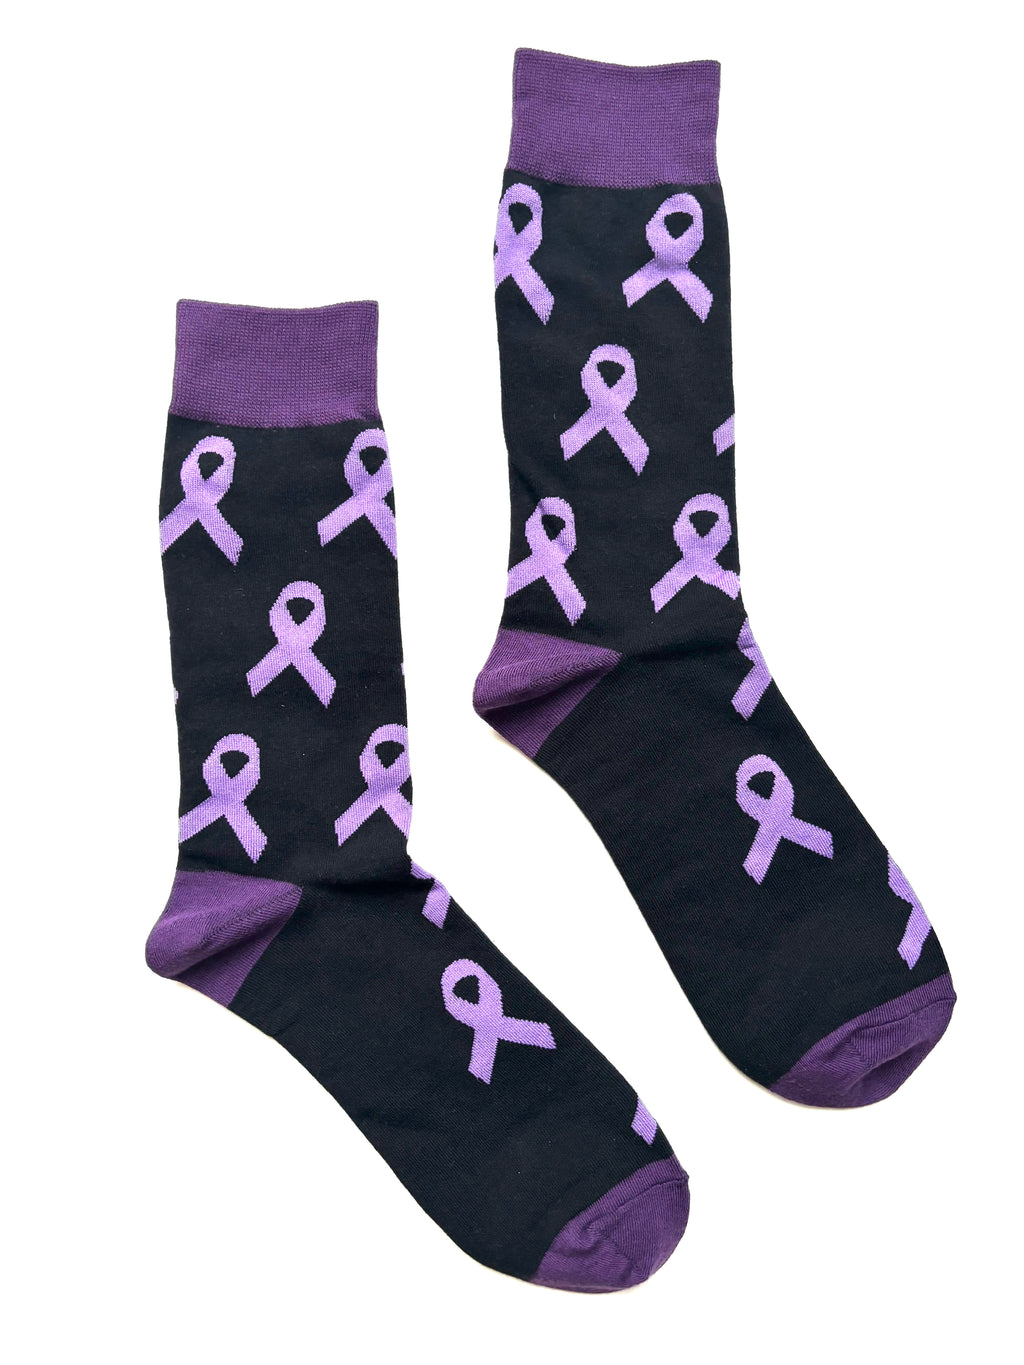 Purple ribbon socks for Sunny Day Camps